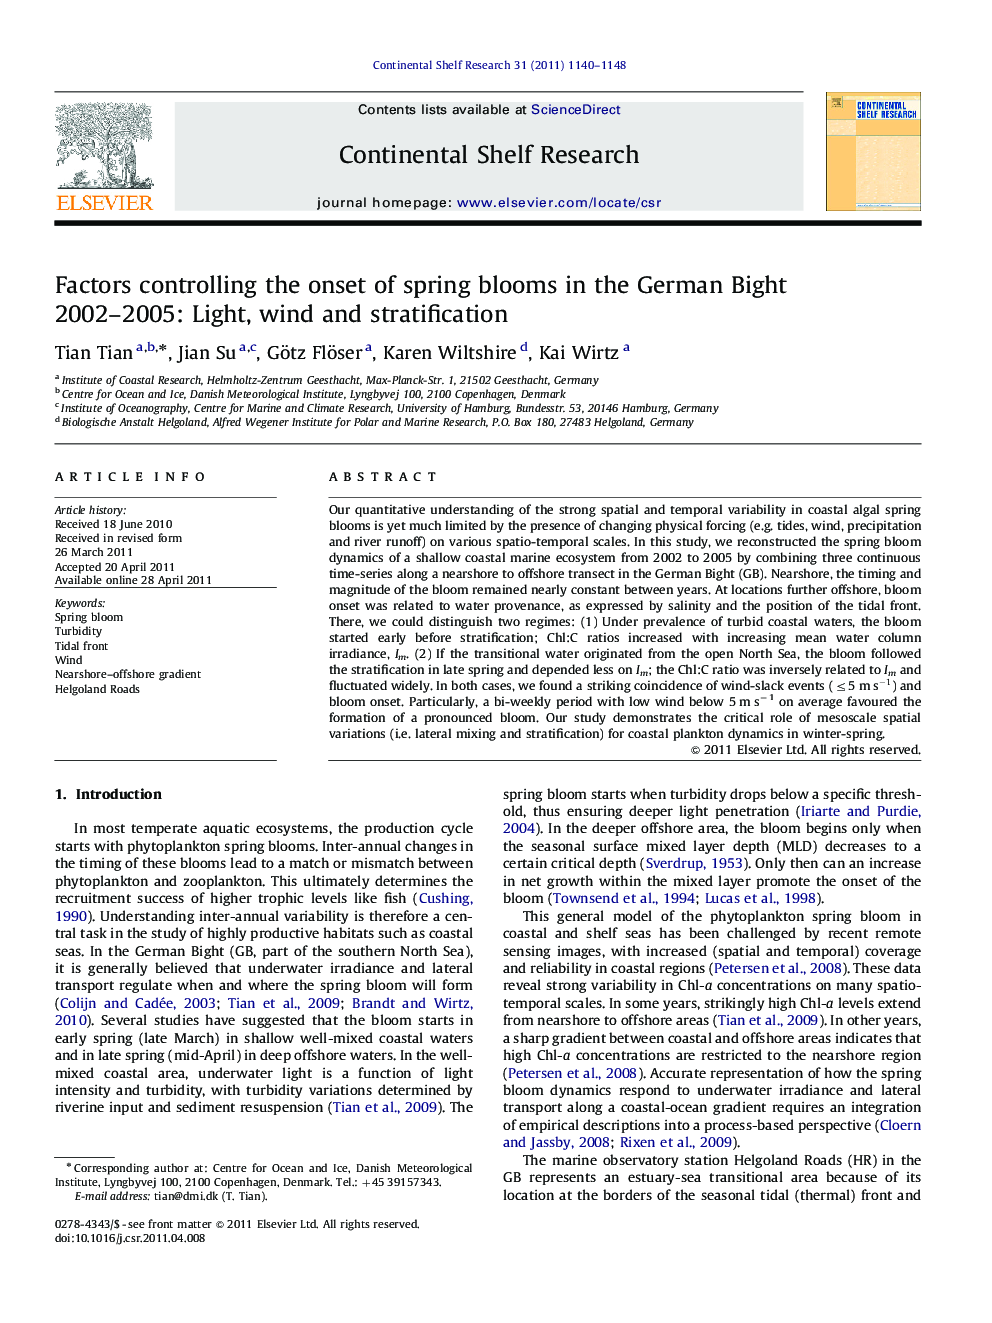 Factors controlling the onset of spring blooms in the German Bight 2002–2005: Light, wind and stratification